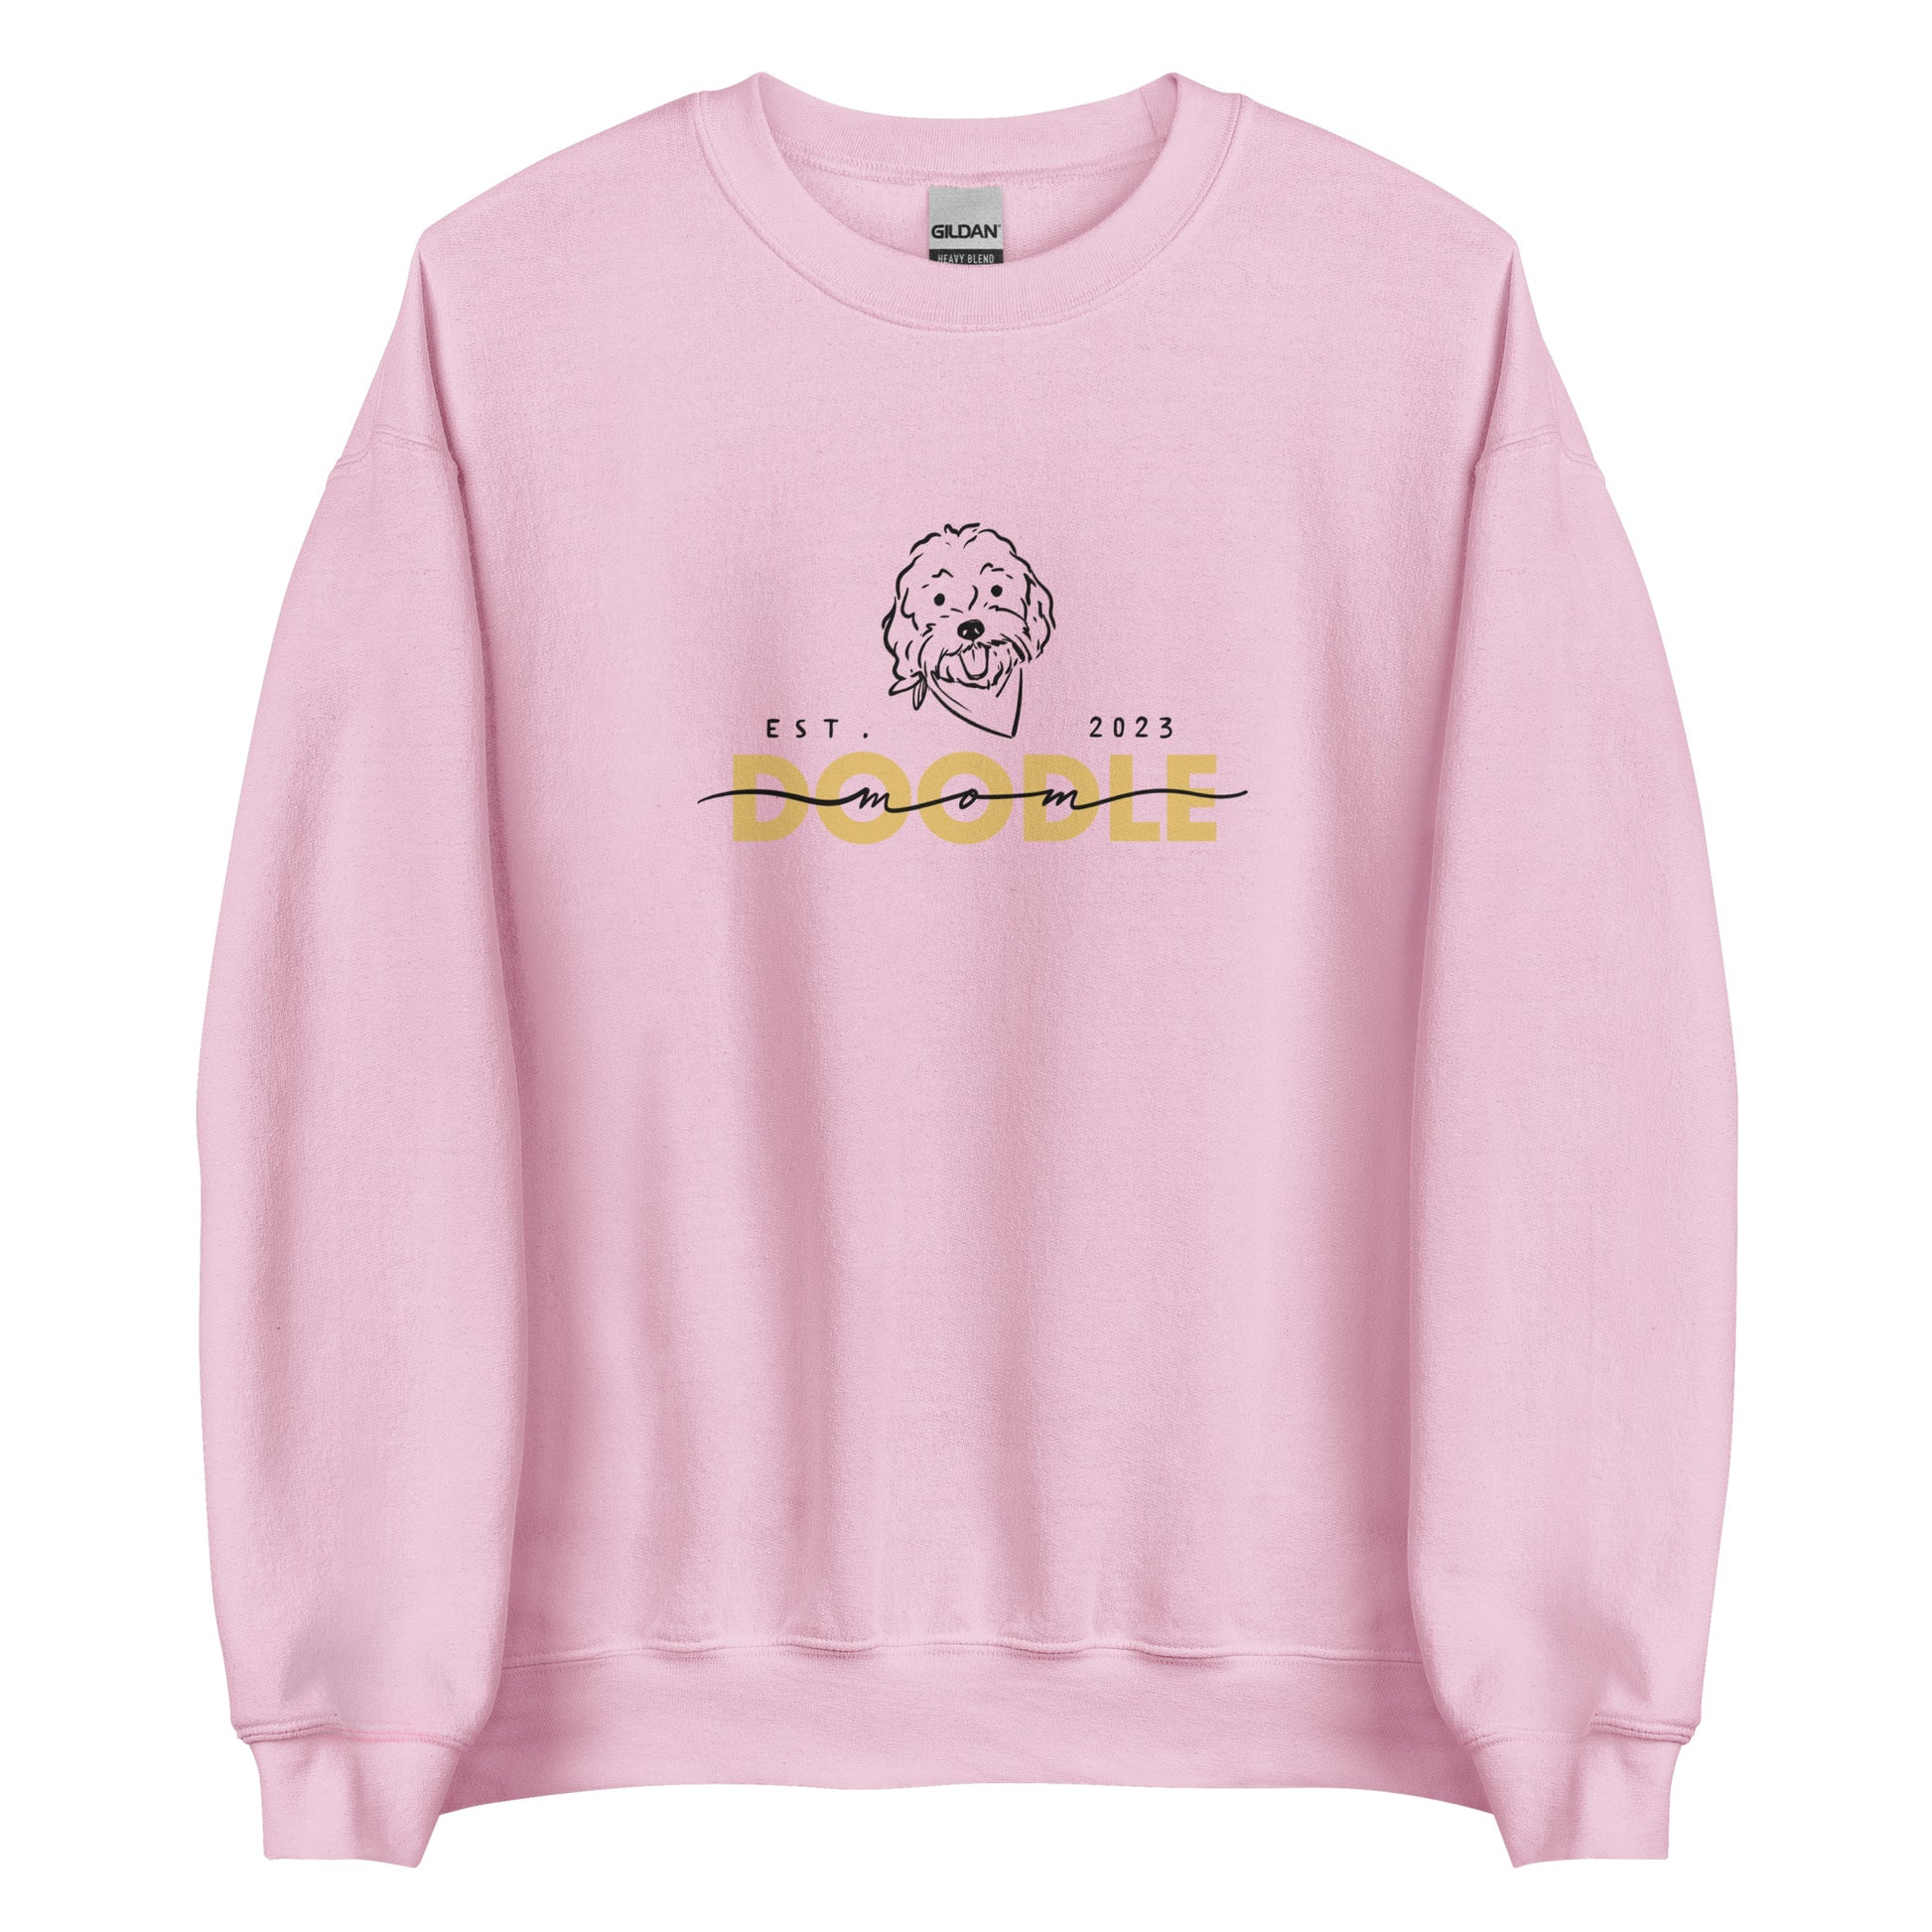 Goldendoodle Mom crew neck sweatshirt with Goldendoodle face and words "Doodle Mom Est 2023" in light pink  color